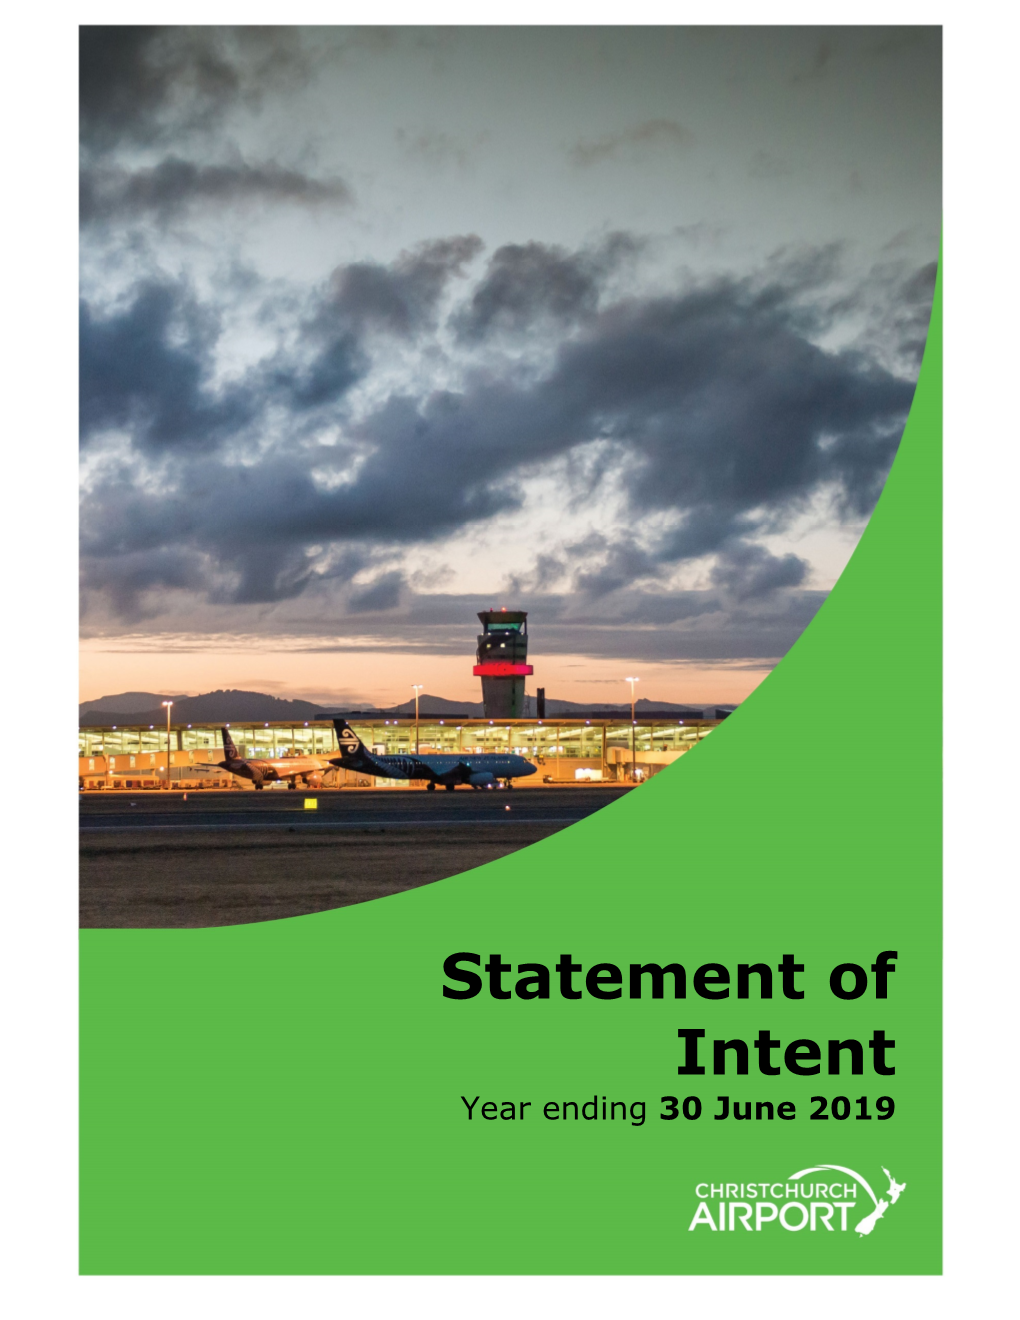 Statement of Intent Year Ending 30 June 2019